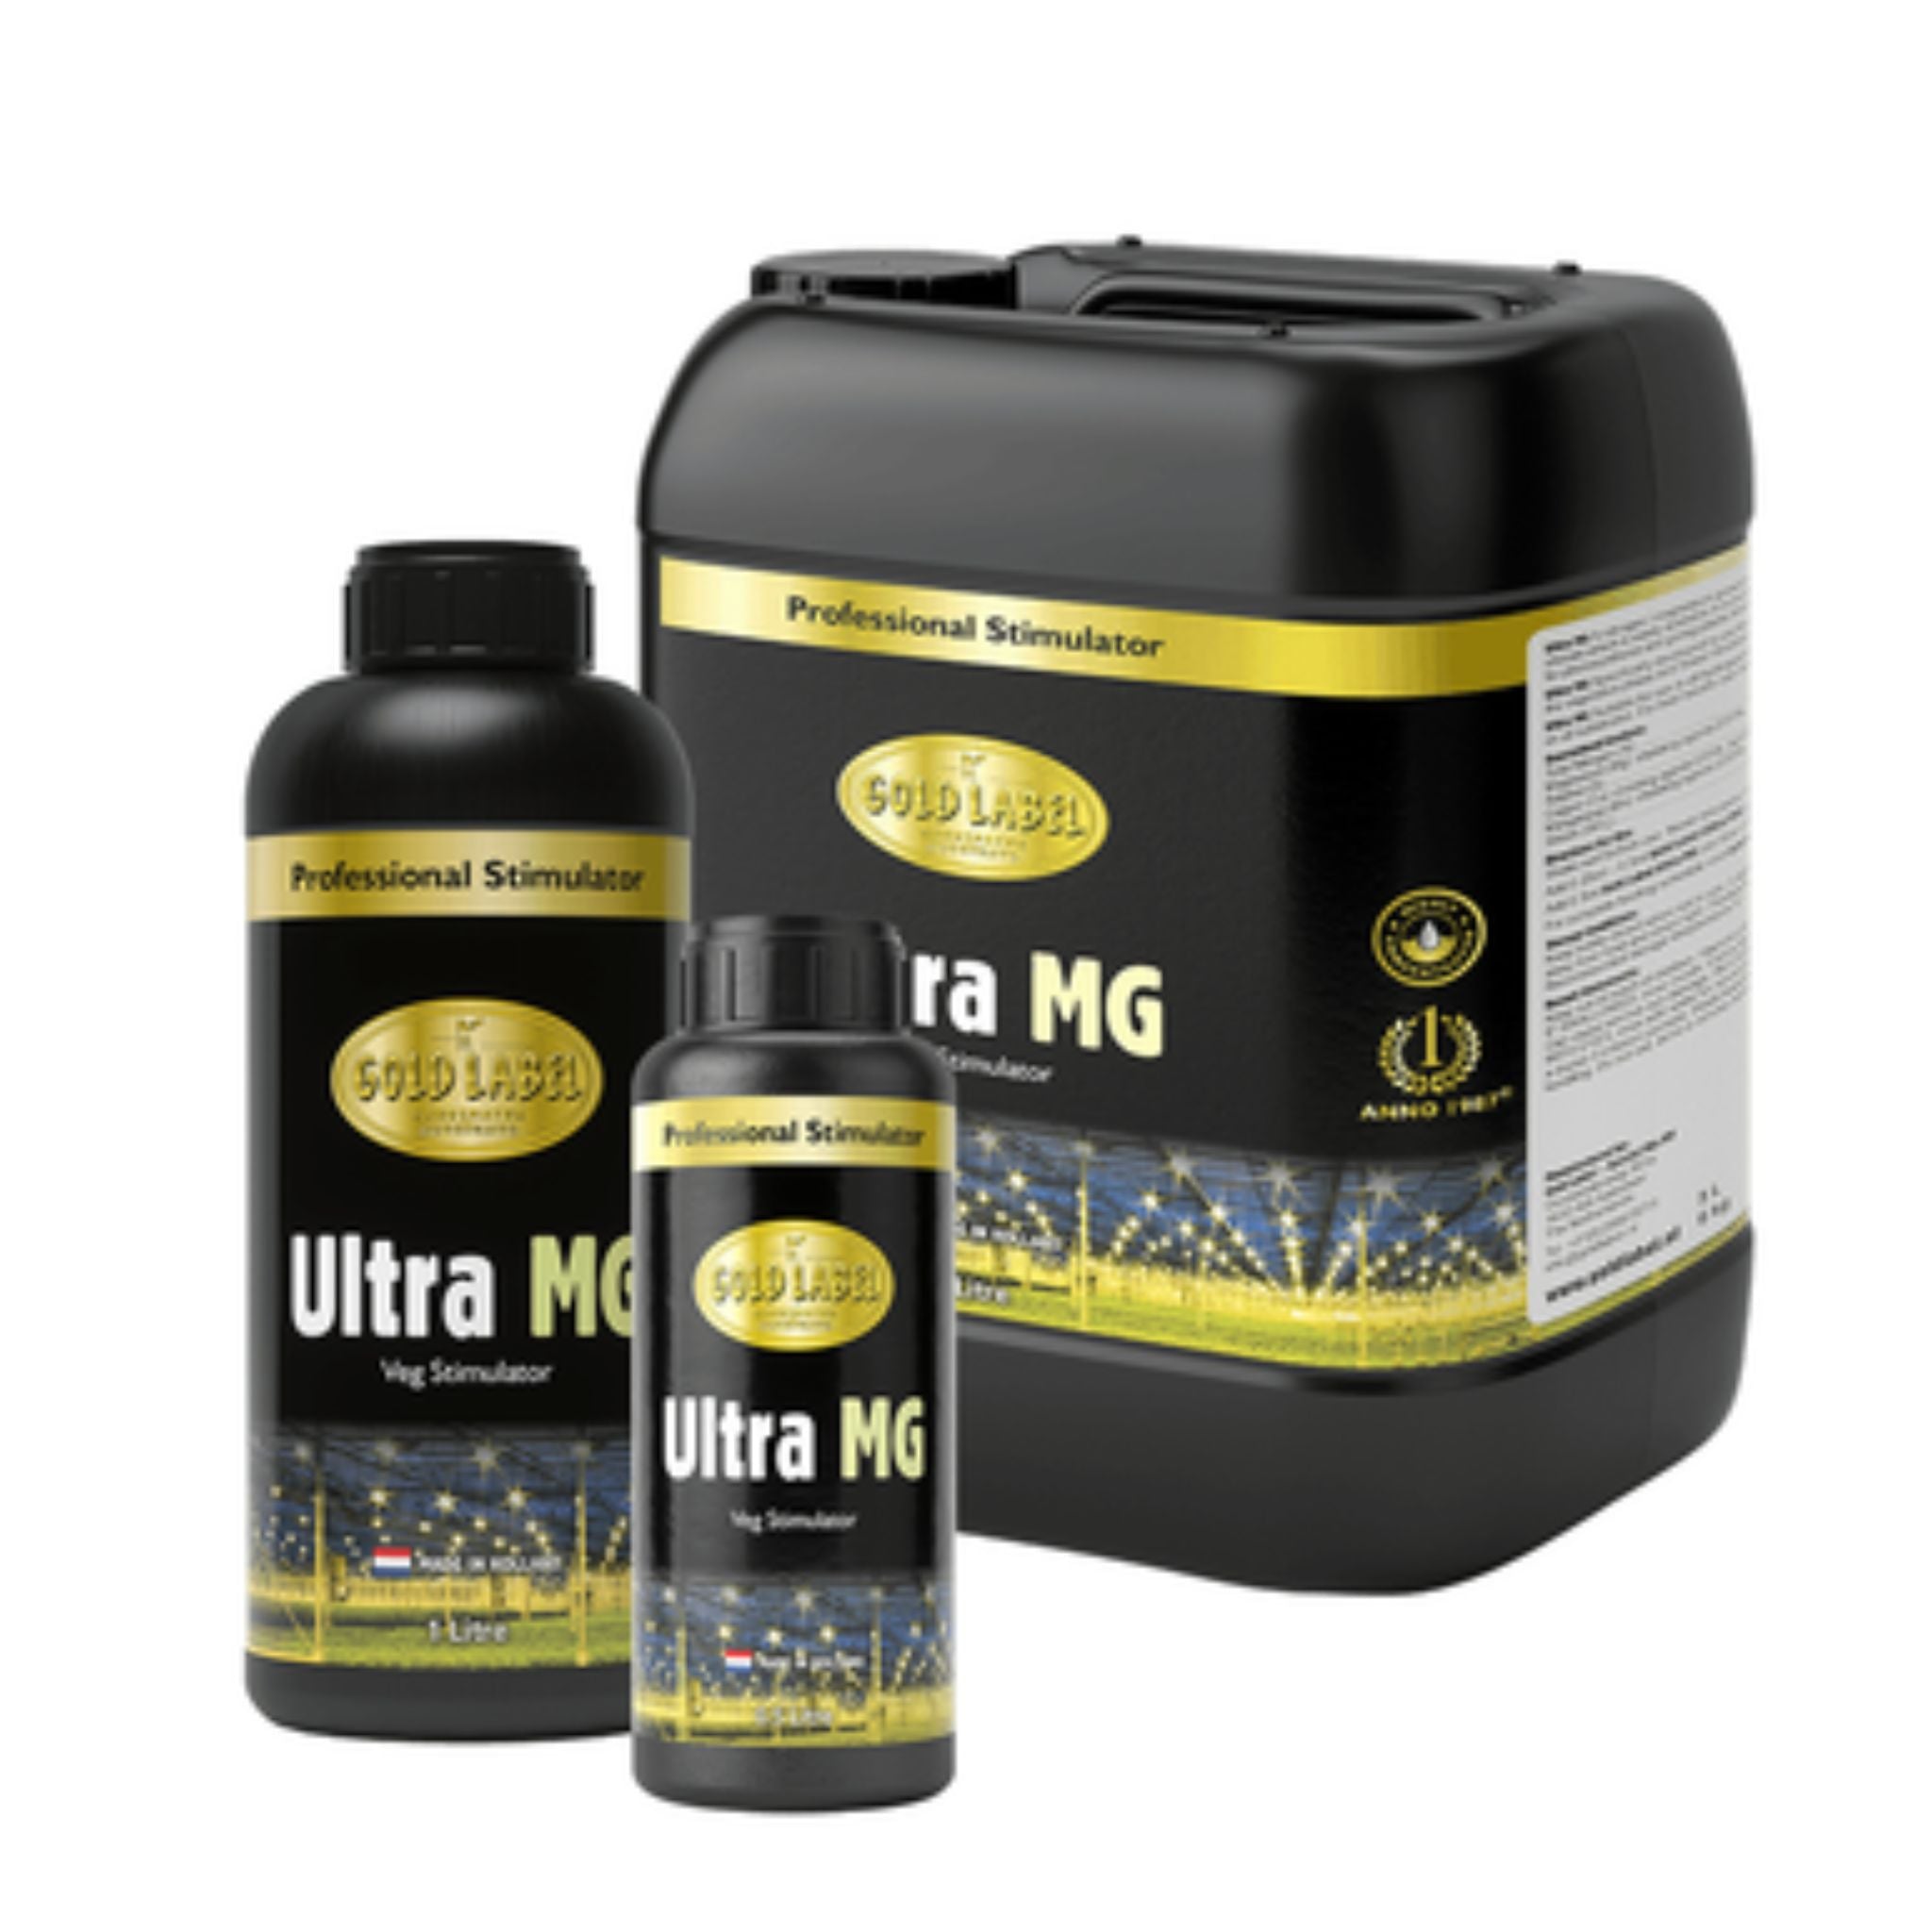 Gold Label Ultra MG Magnesium